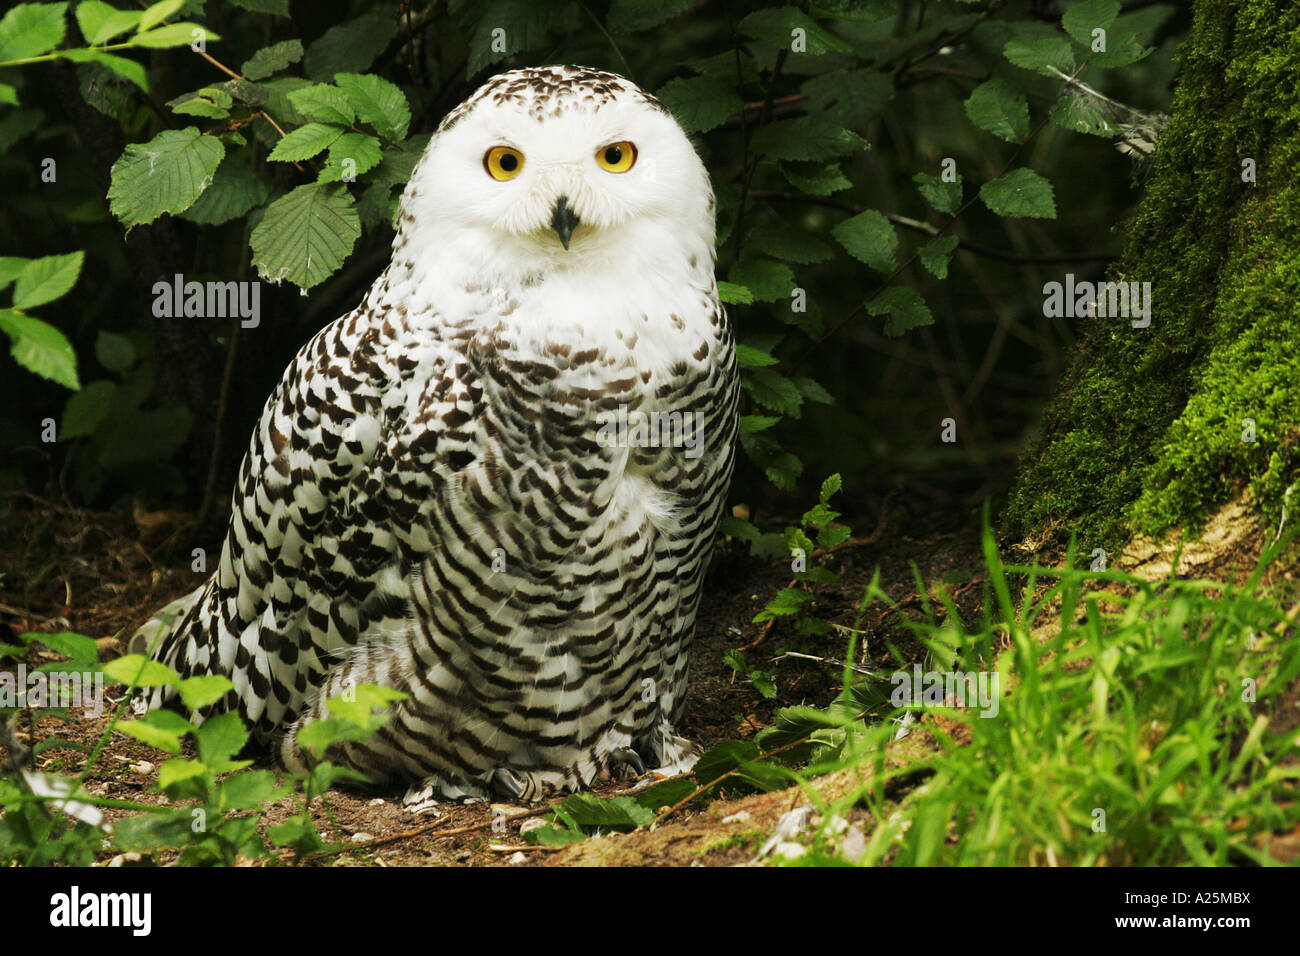 snowy owl (Nyctea scandiaca), symbol of the canadian province Quebec Stock Photo